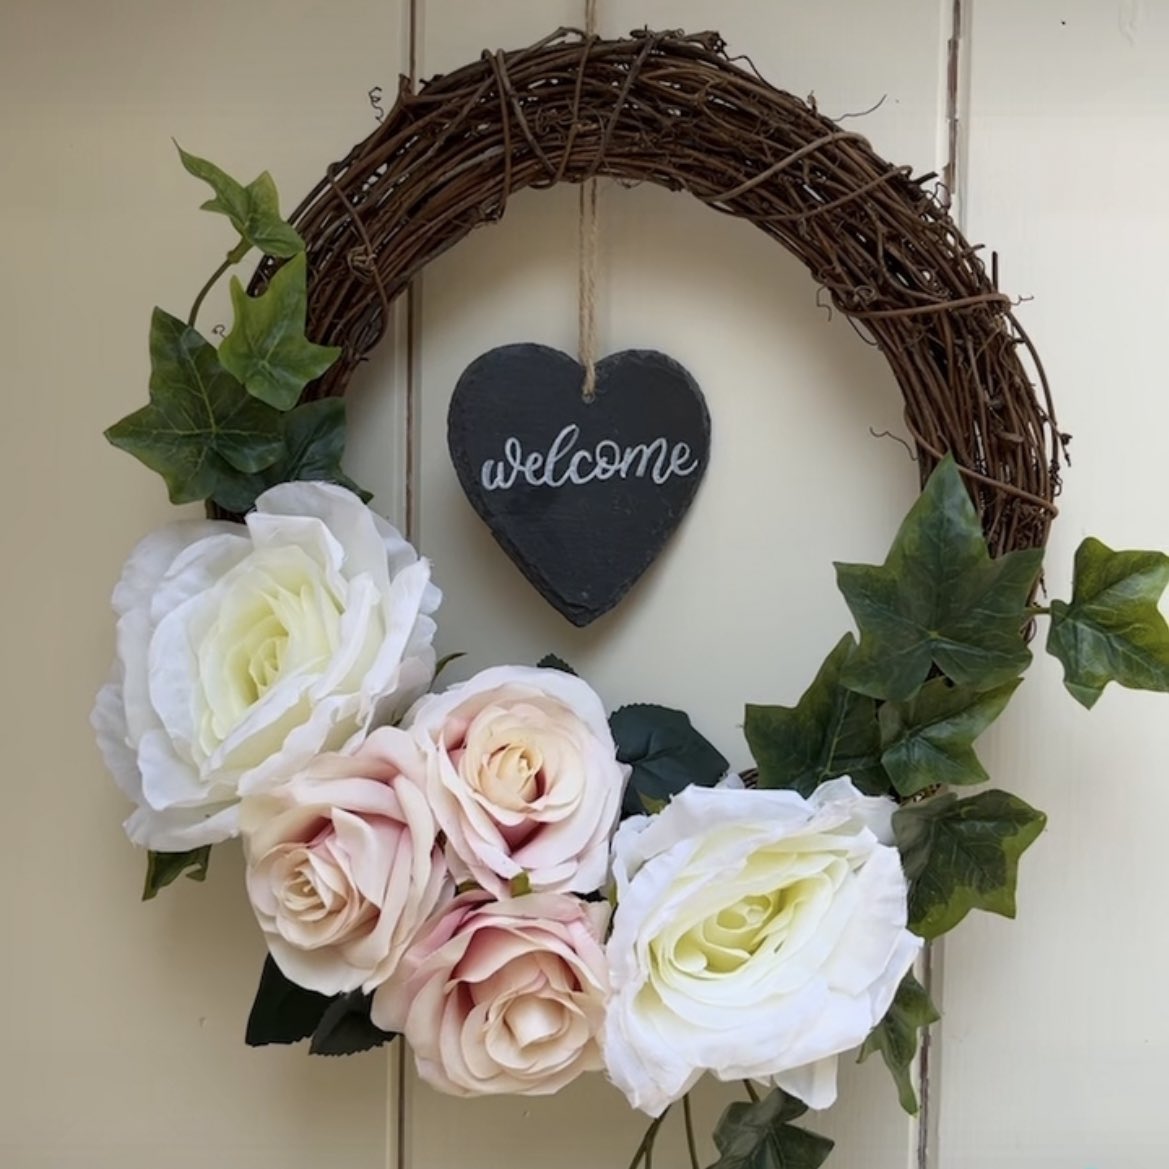 New to my Etsy shop - personalised door wreaths 🌸 All handmade - Pop over to my Etsy shop to have a look! 
#doorwreath #fauxflowers #personaliseddoorwreath #luxurydoorwreath #personalised #weddingdecor #handmade #handmadedecorations #etsyshopuk #etsy #etsyuk #acornstationery